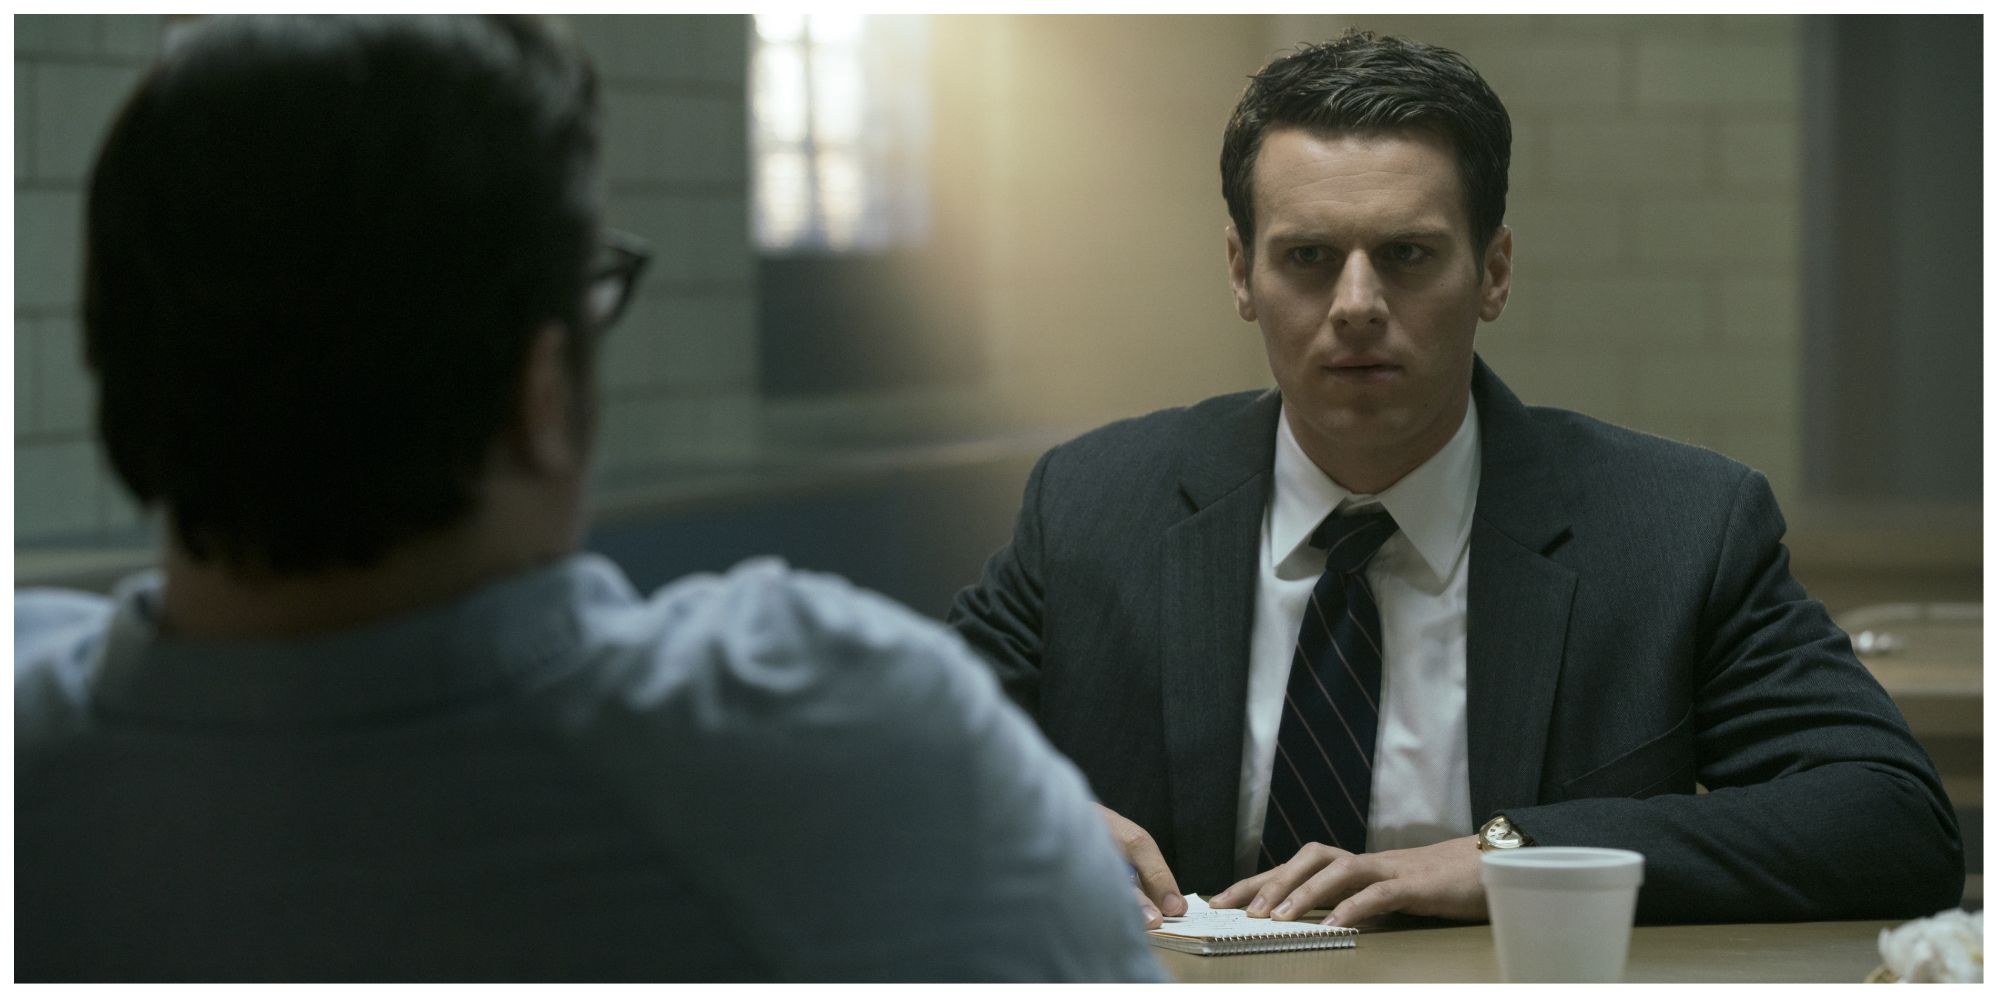 Holden Ford in Mindhunter interrogating someone with a serious expression